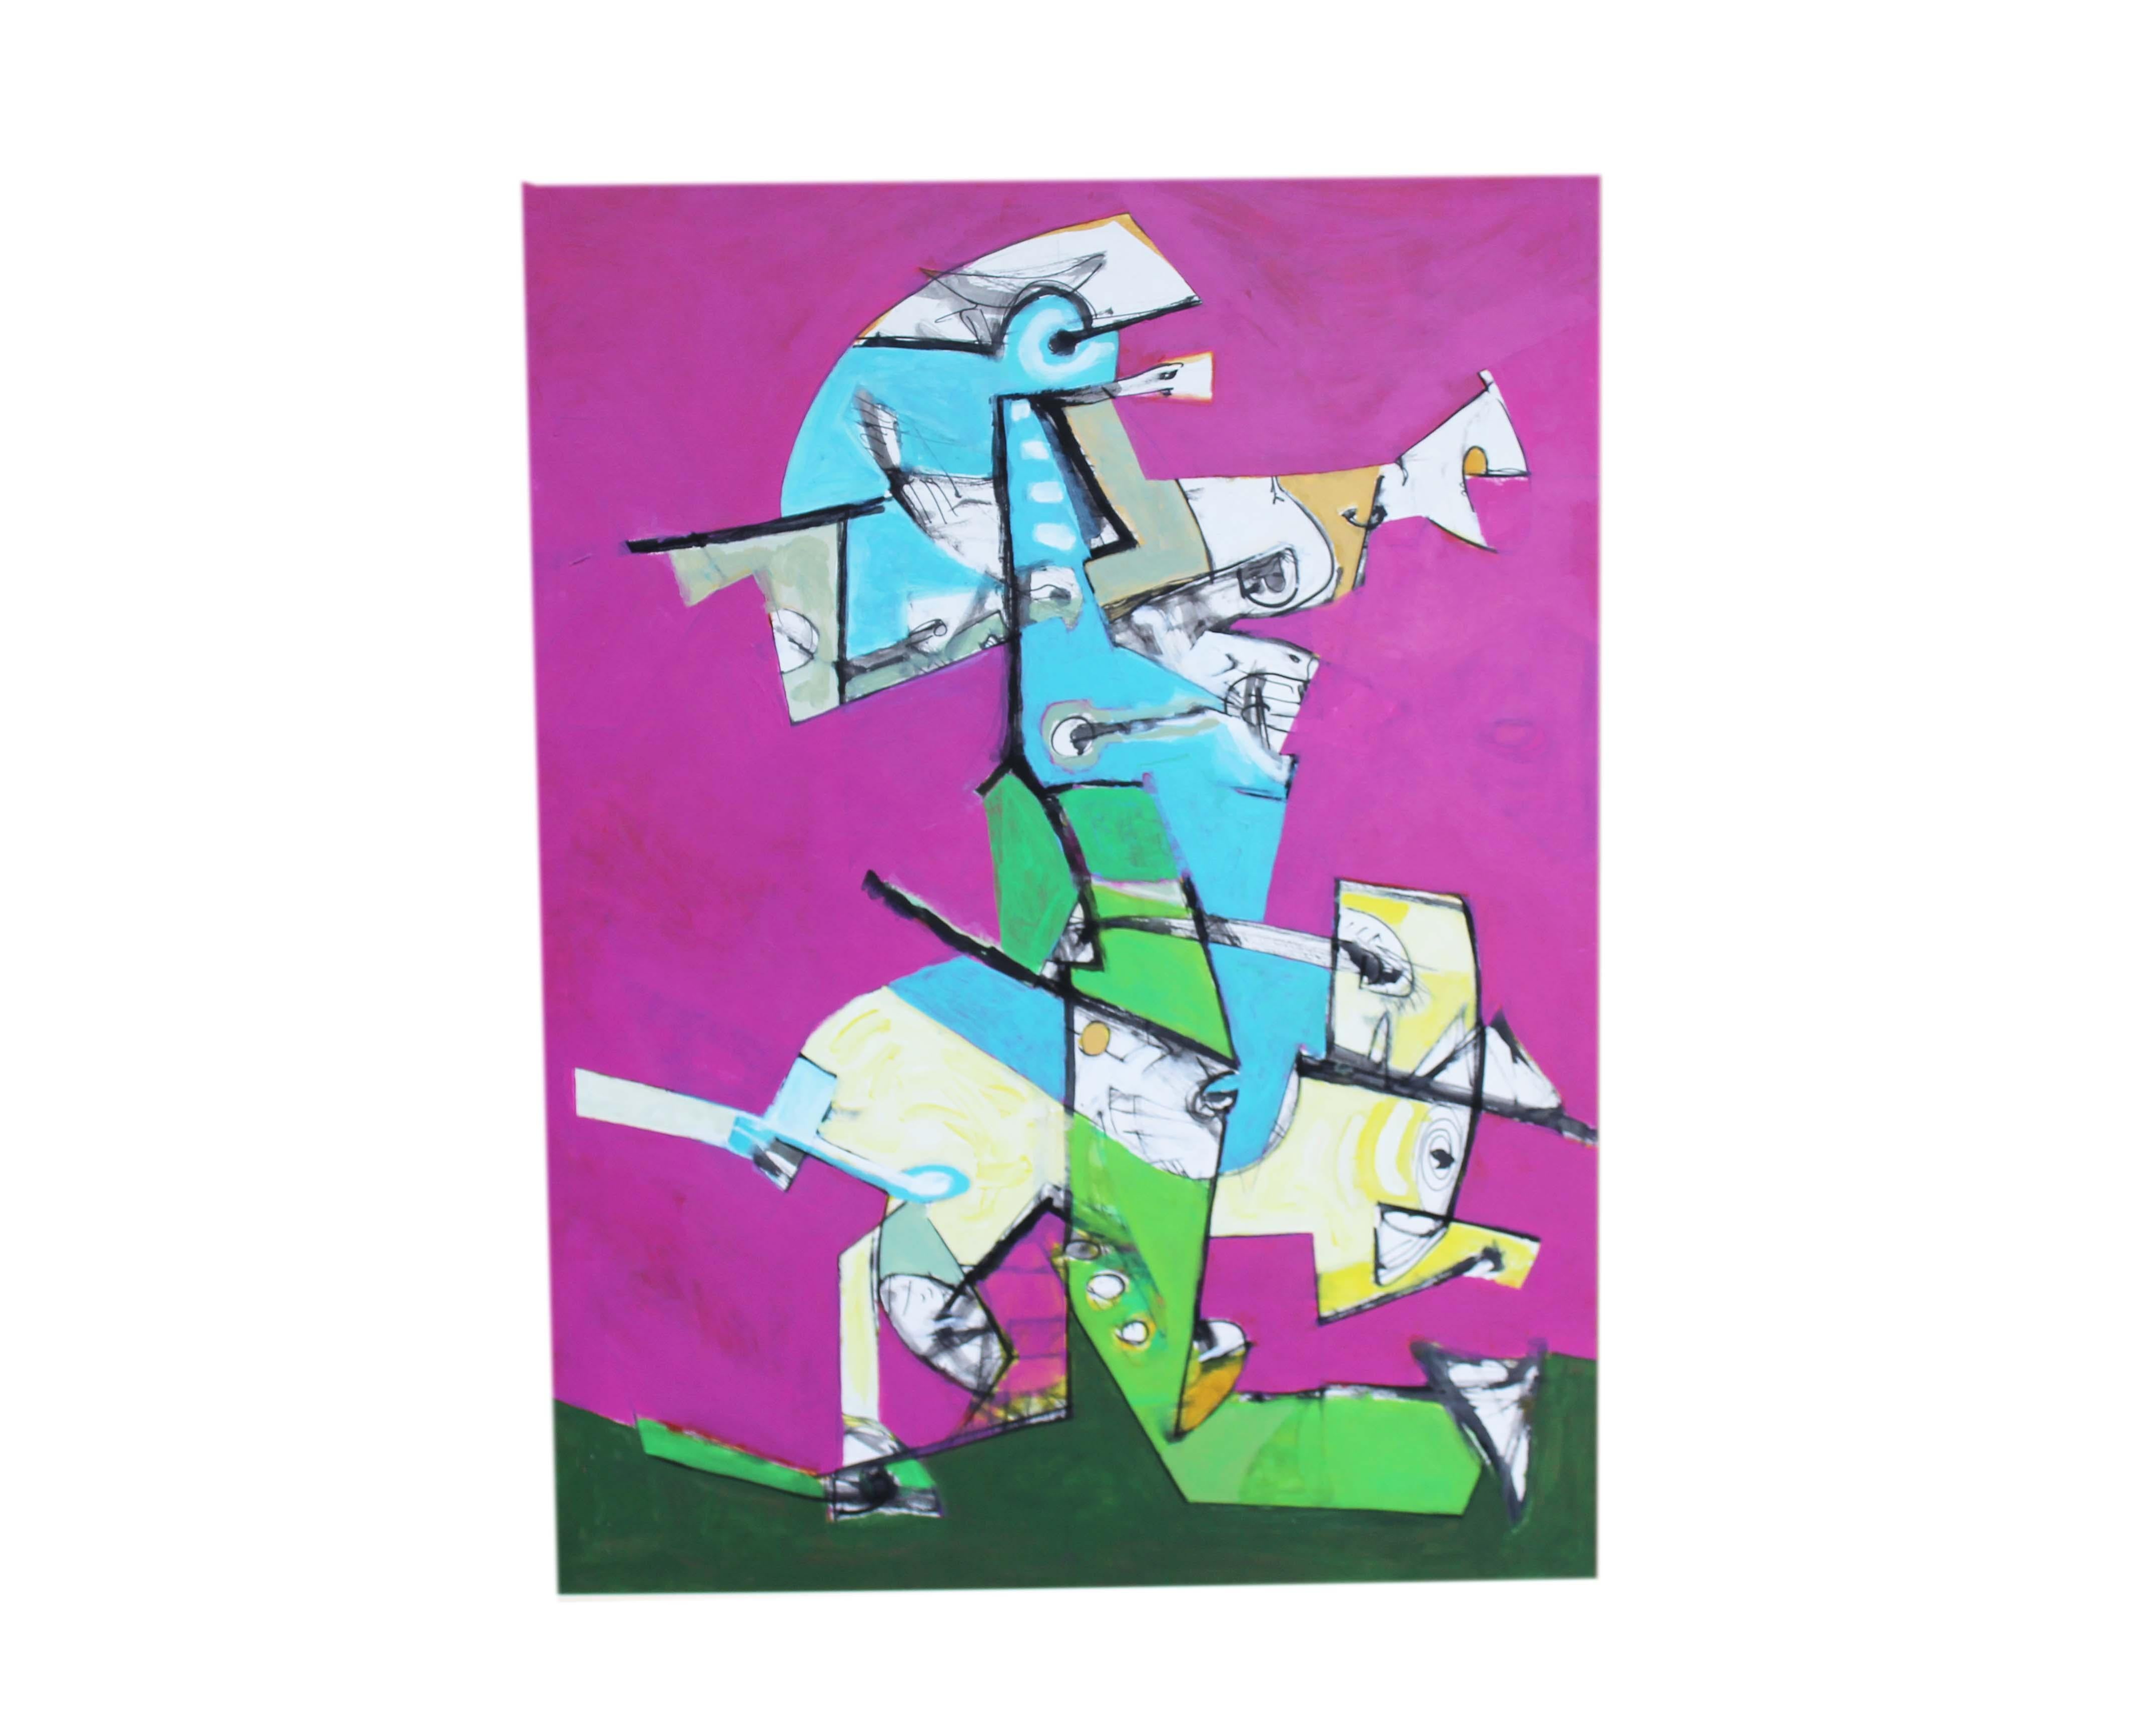 An abstract mixed media painting by American artist James L. Bruch (1942-2023). A figurative shape is contrasted against a bright pink background, in shades of blue, green, gray, orange, black, and white. The painting is displayed in a gold-tone